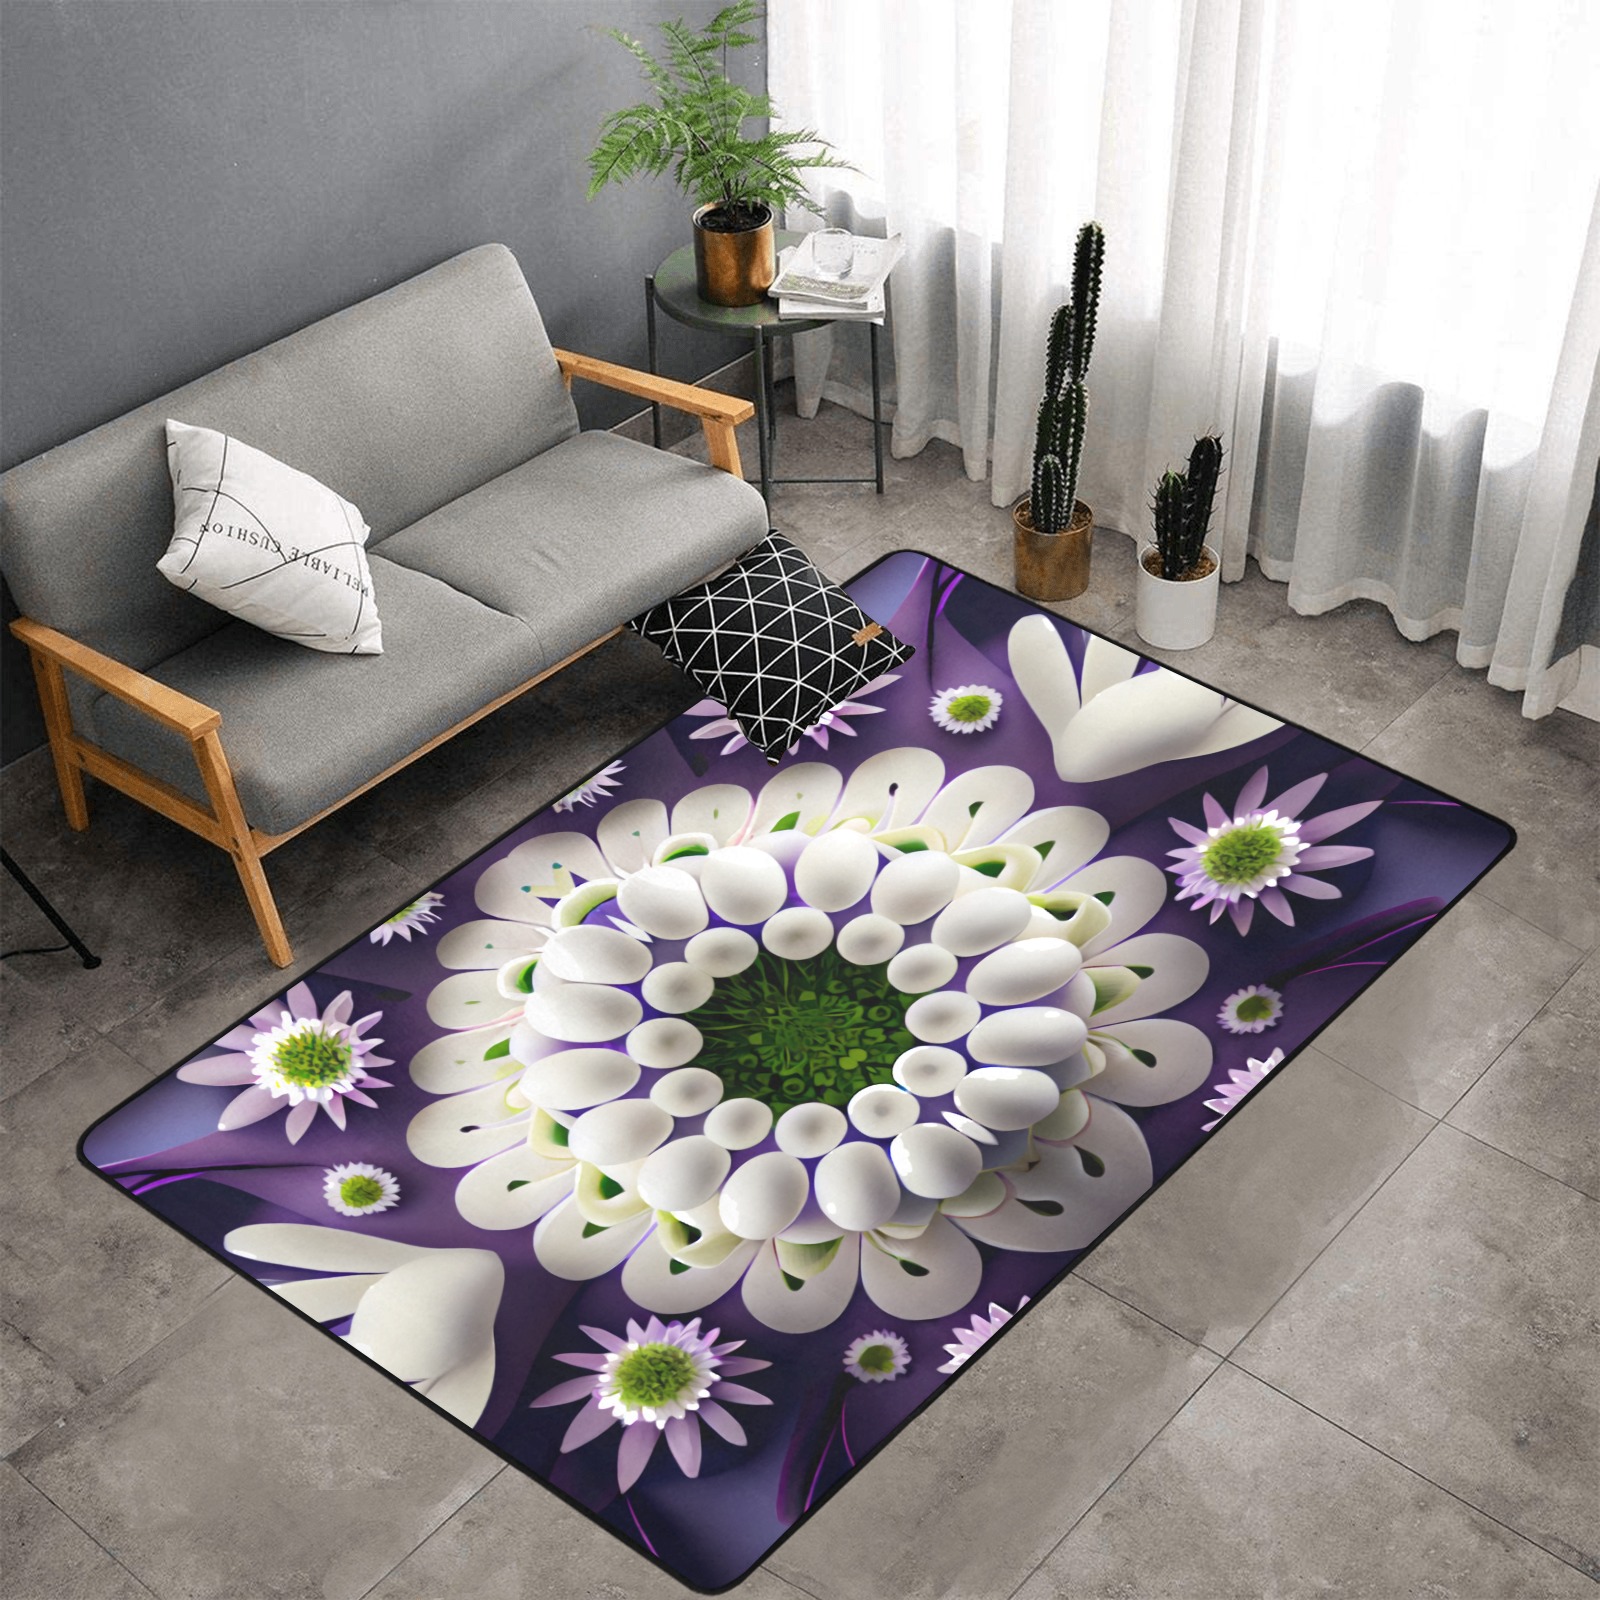 violet and white floral pattern 2 Area Rug with Black Binding 7'x5'